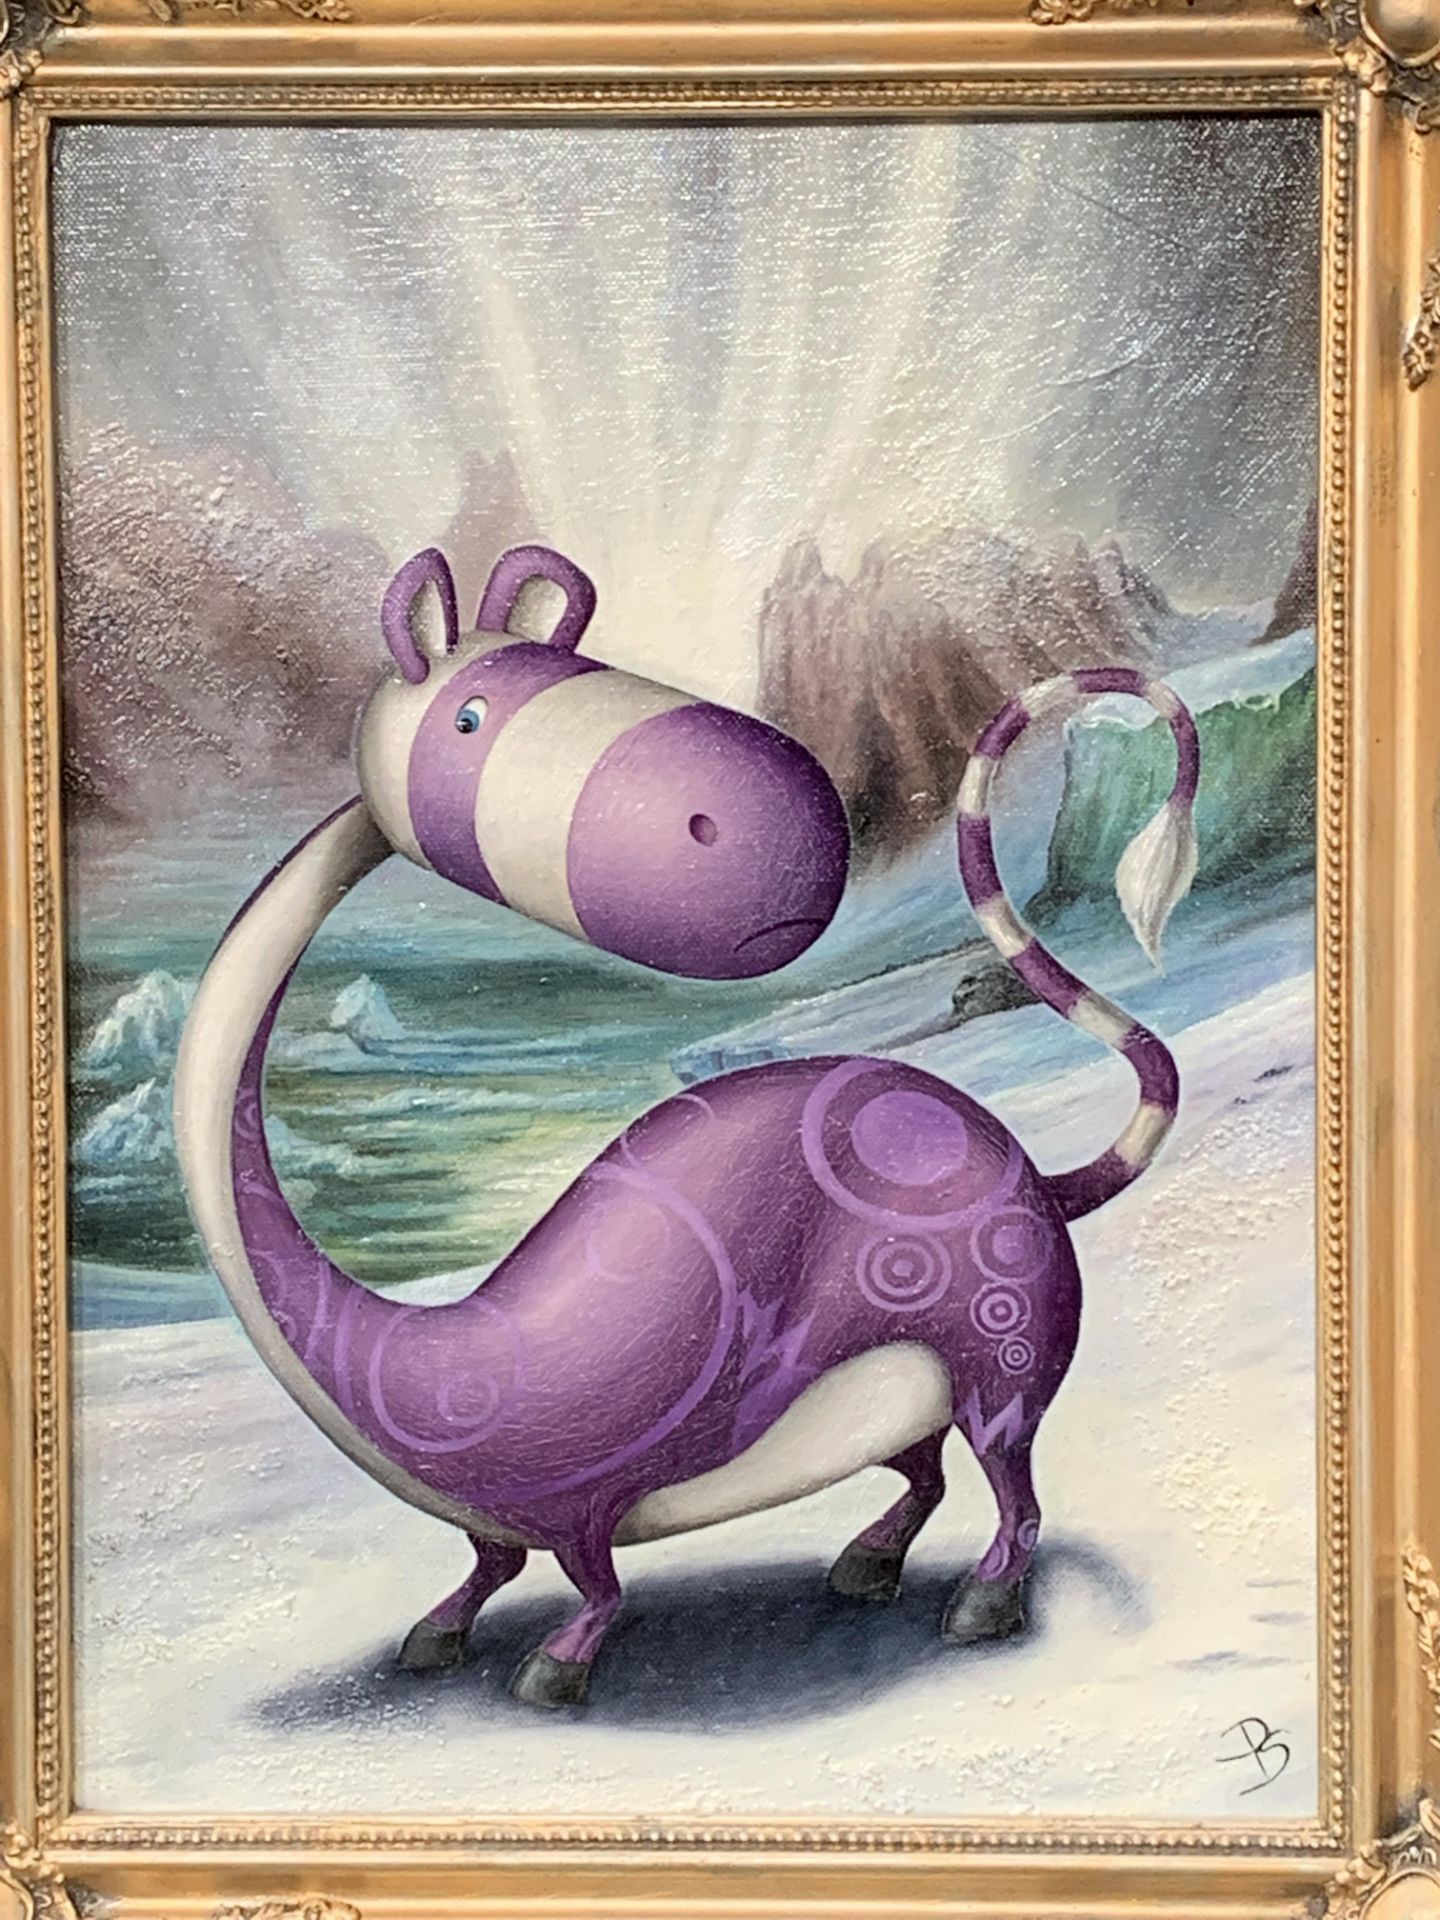 Gilt framed oil on canvas 'The Lesser Spotted Knickerbocker Glory' by Peter Smith - Image 2 of 4